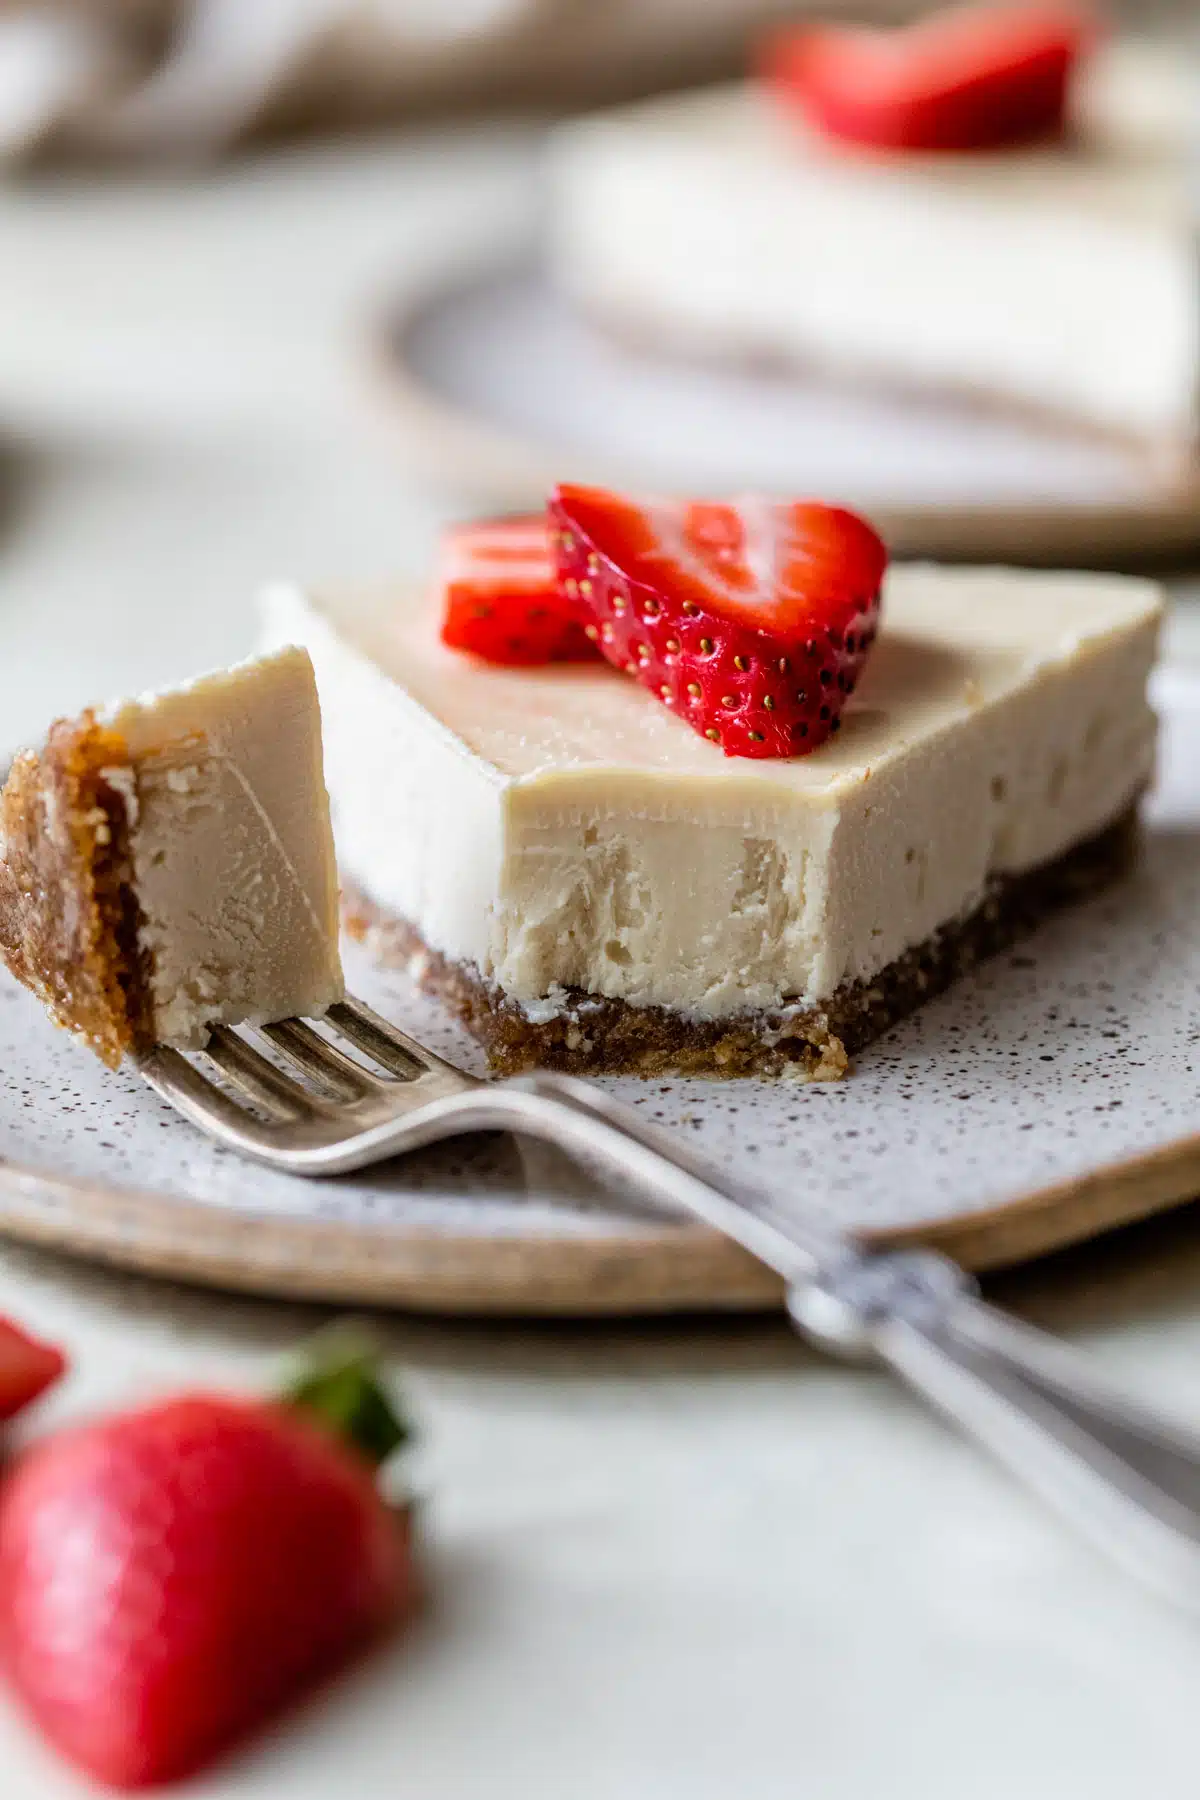 a side view of a slice of cheesecake on a plate with a fork